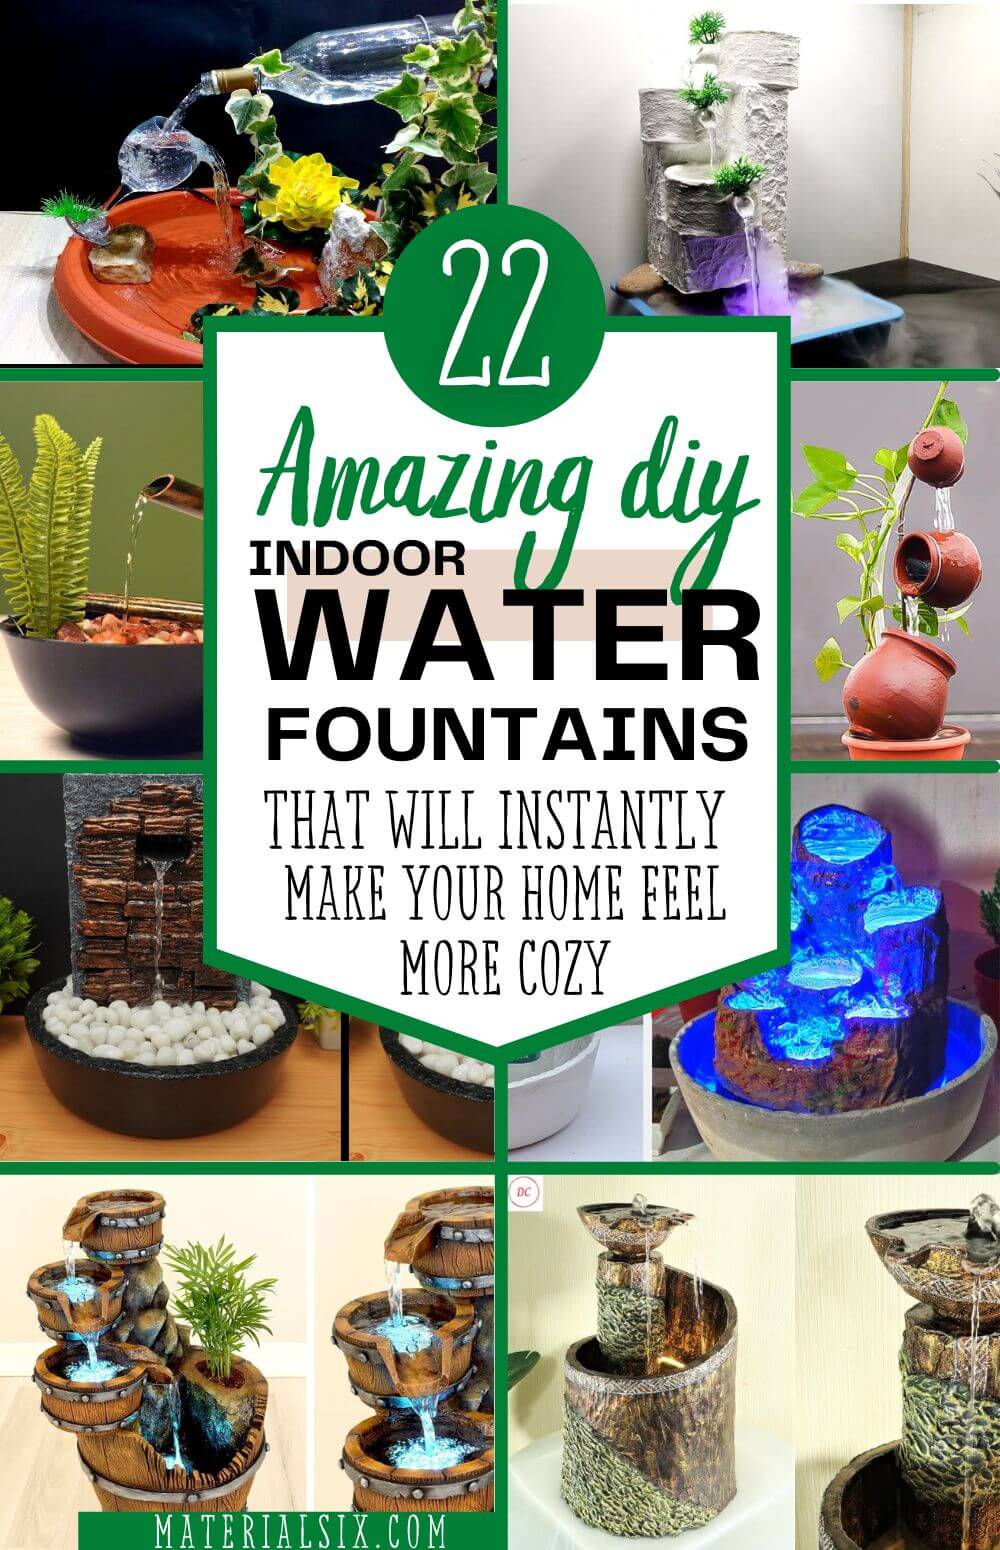 Amazing DIY Indoor Water Fountains for Your Home